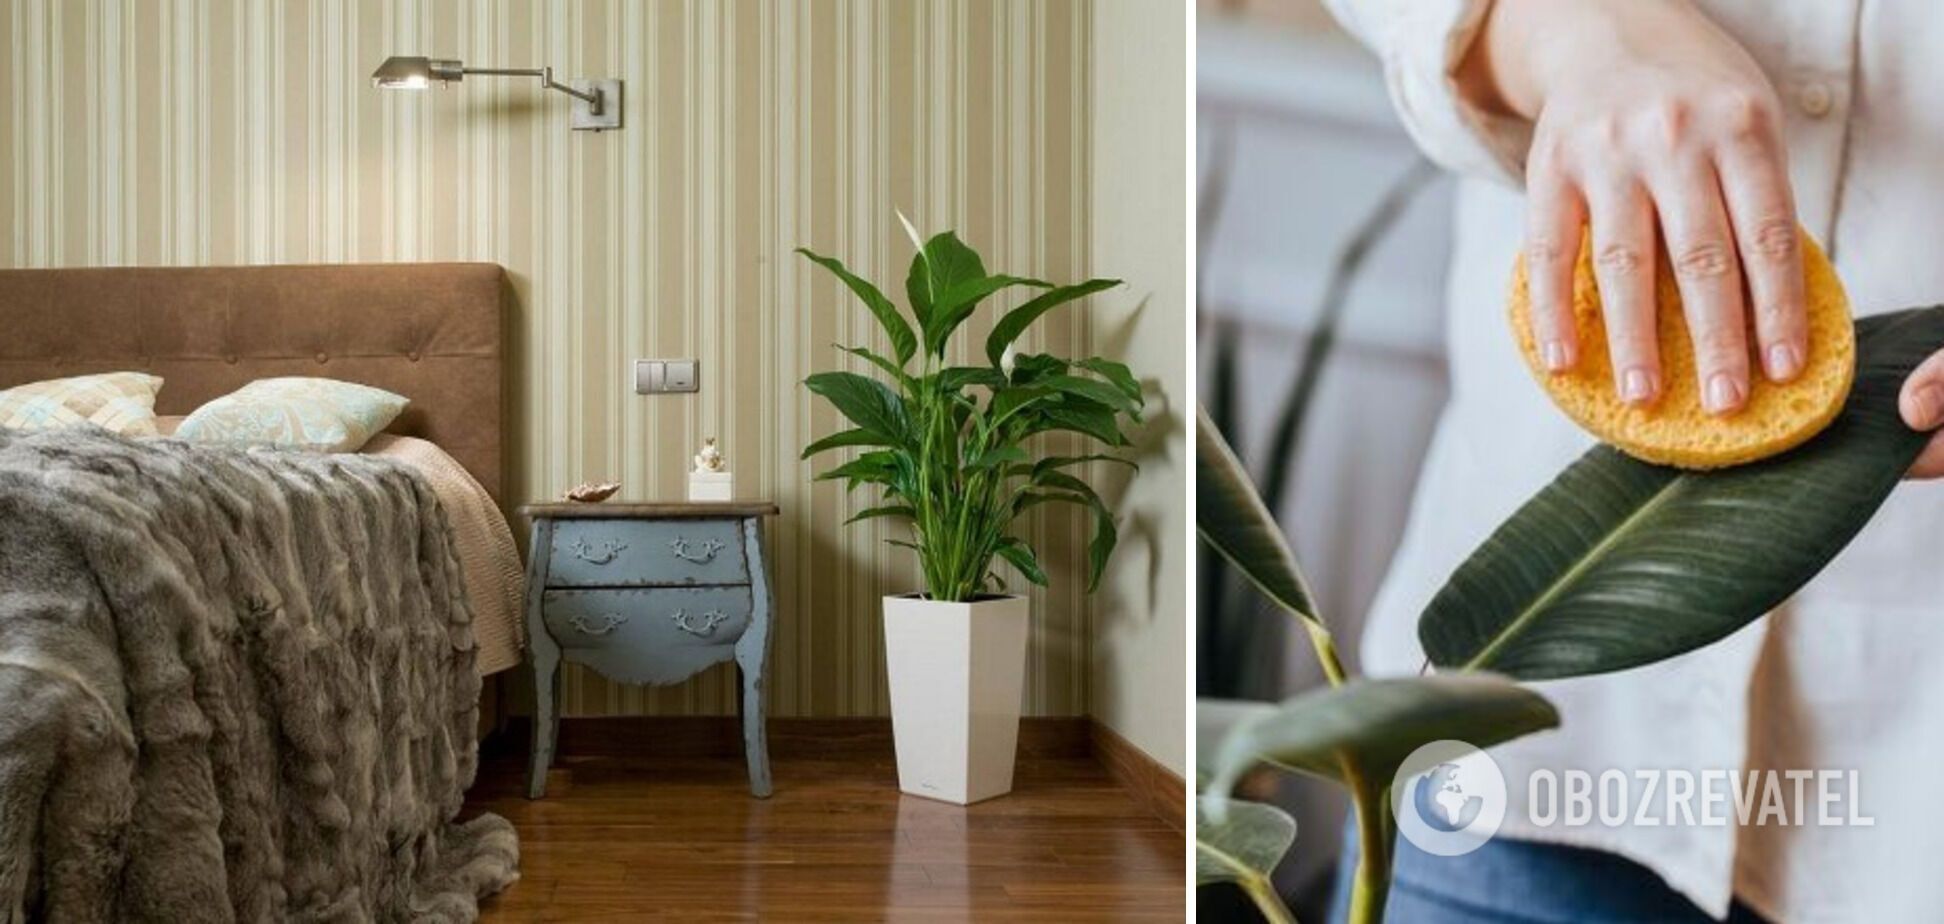 Artificial plants are easy to clean